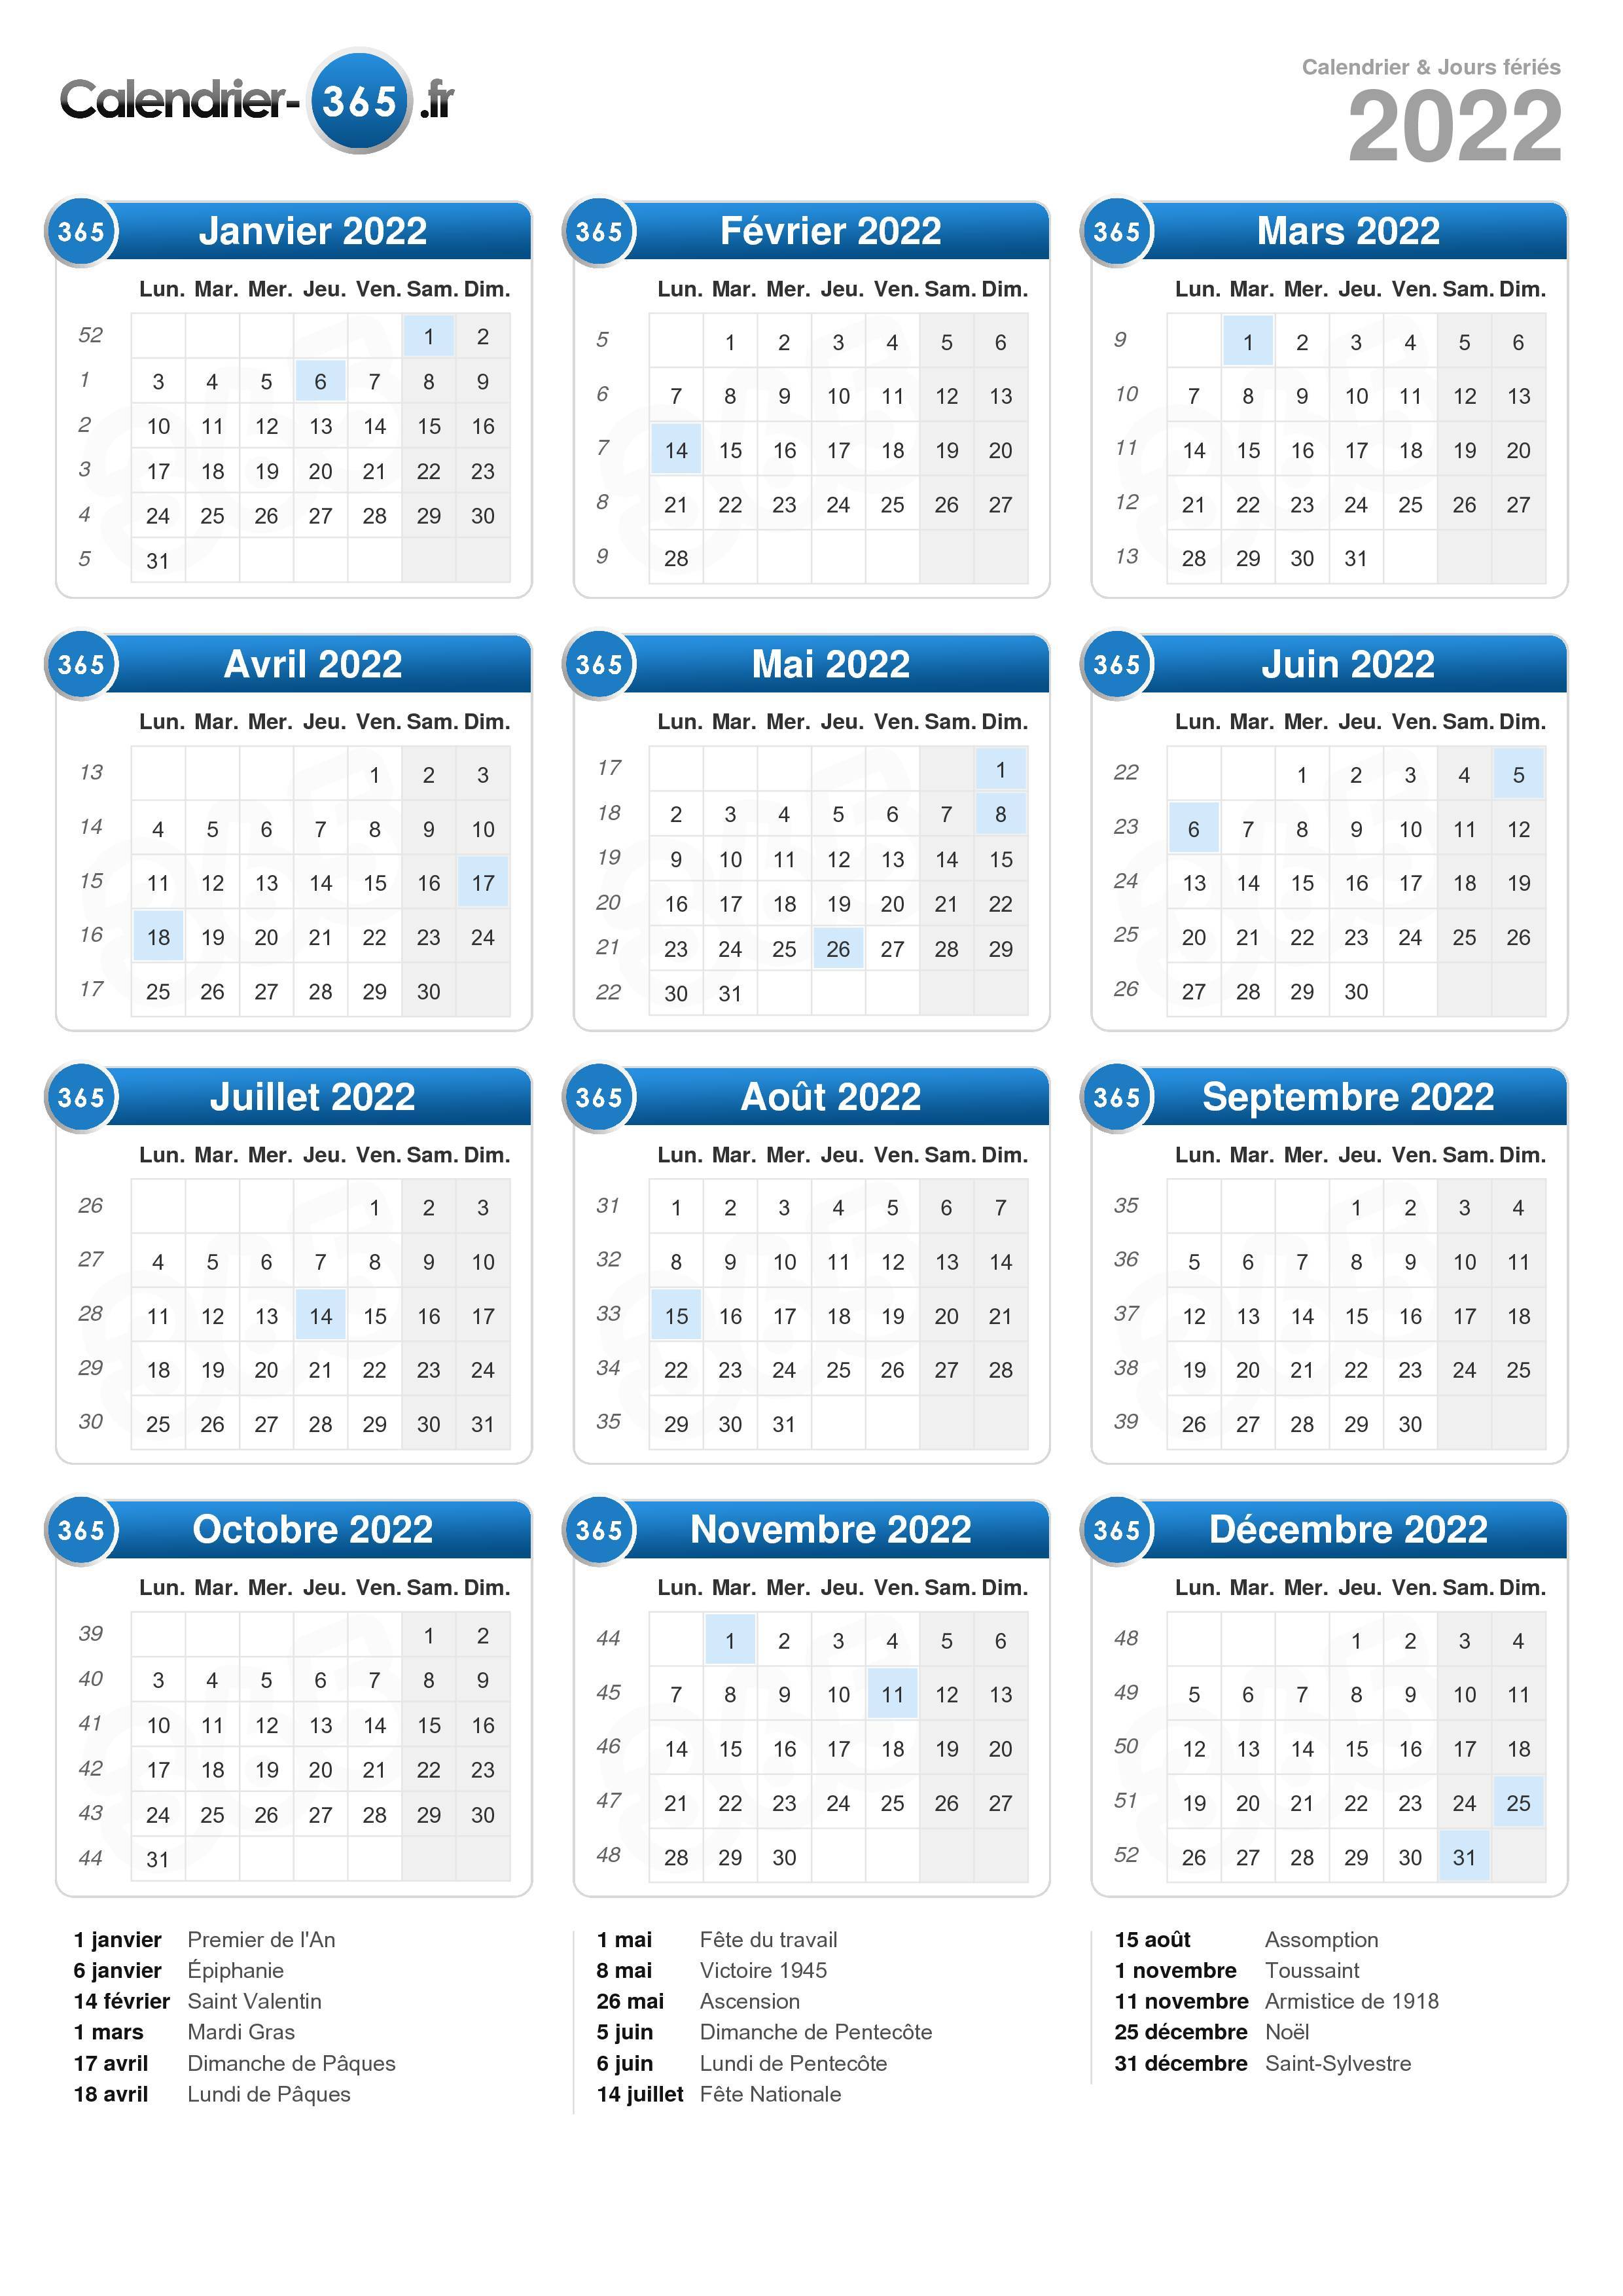 Calendrier 2022 Semaines Paires Calendrier 2022